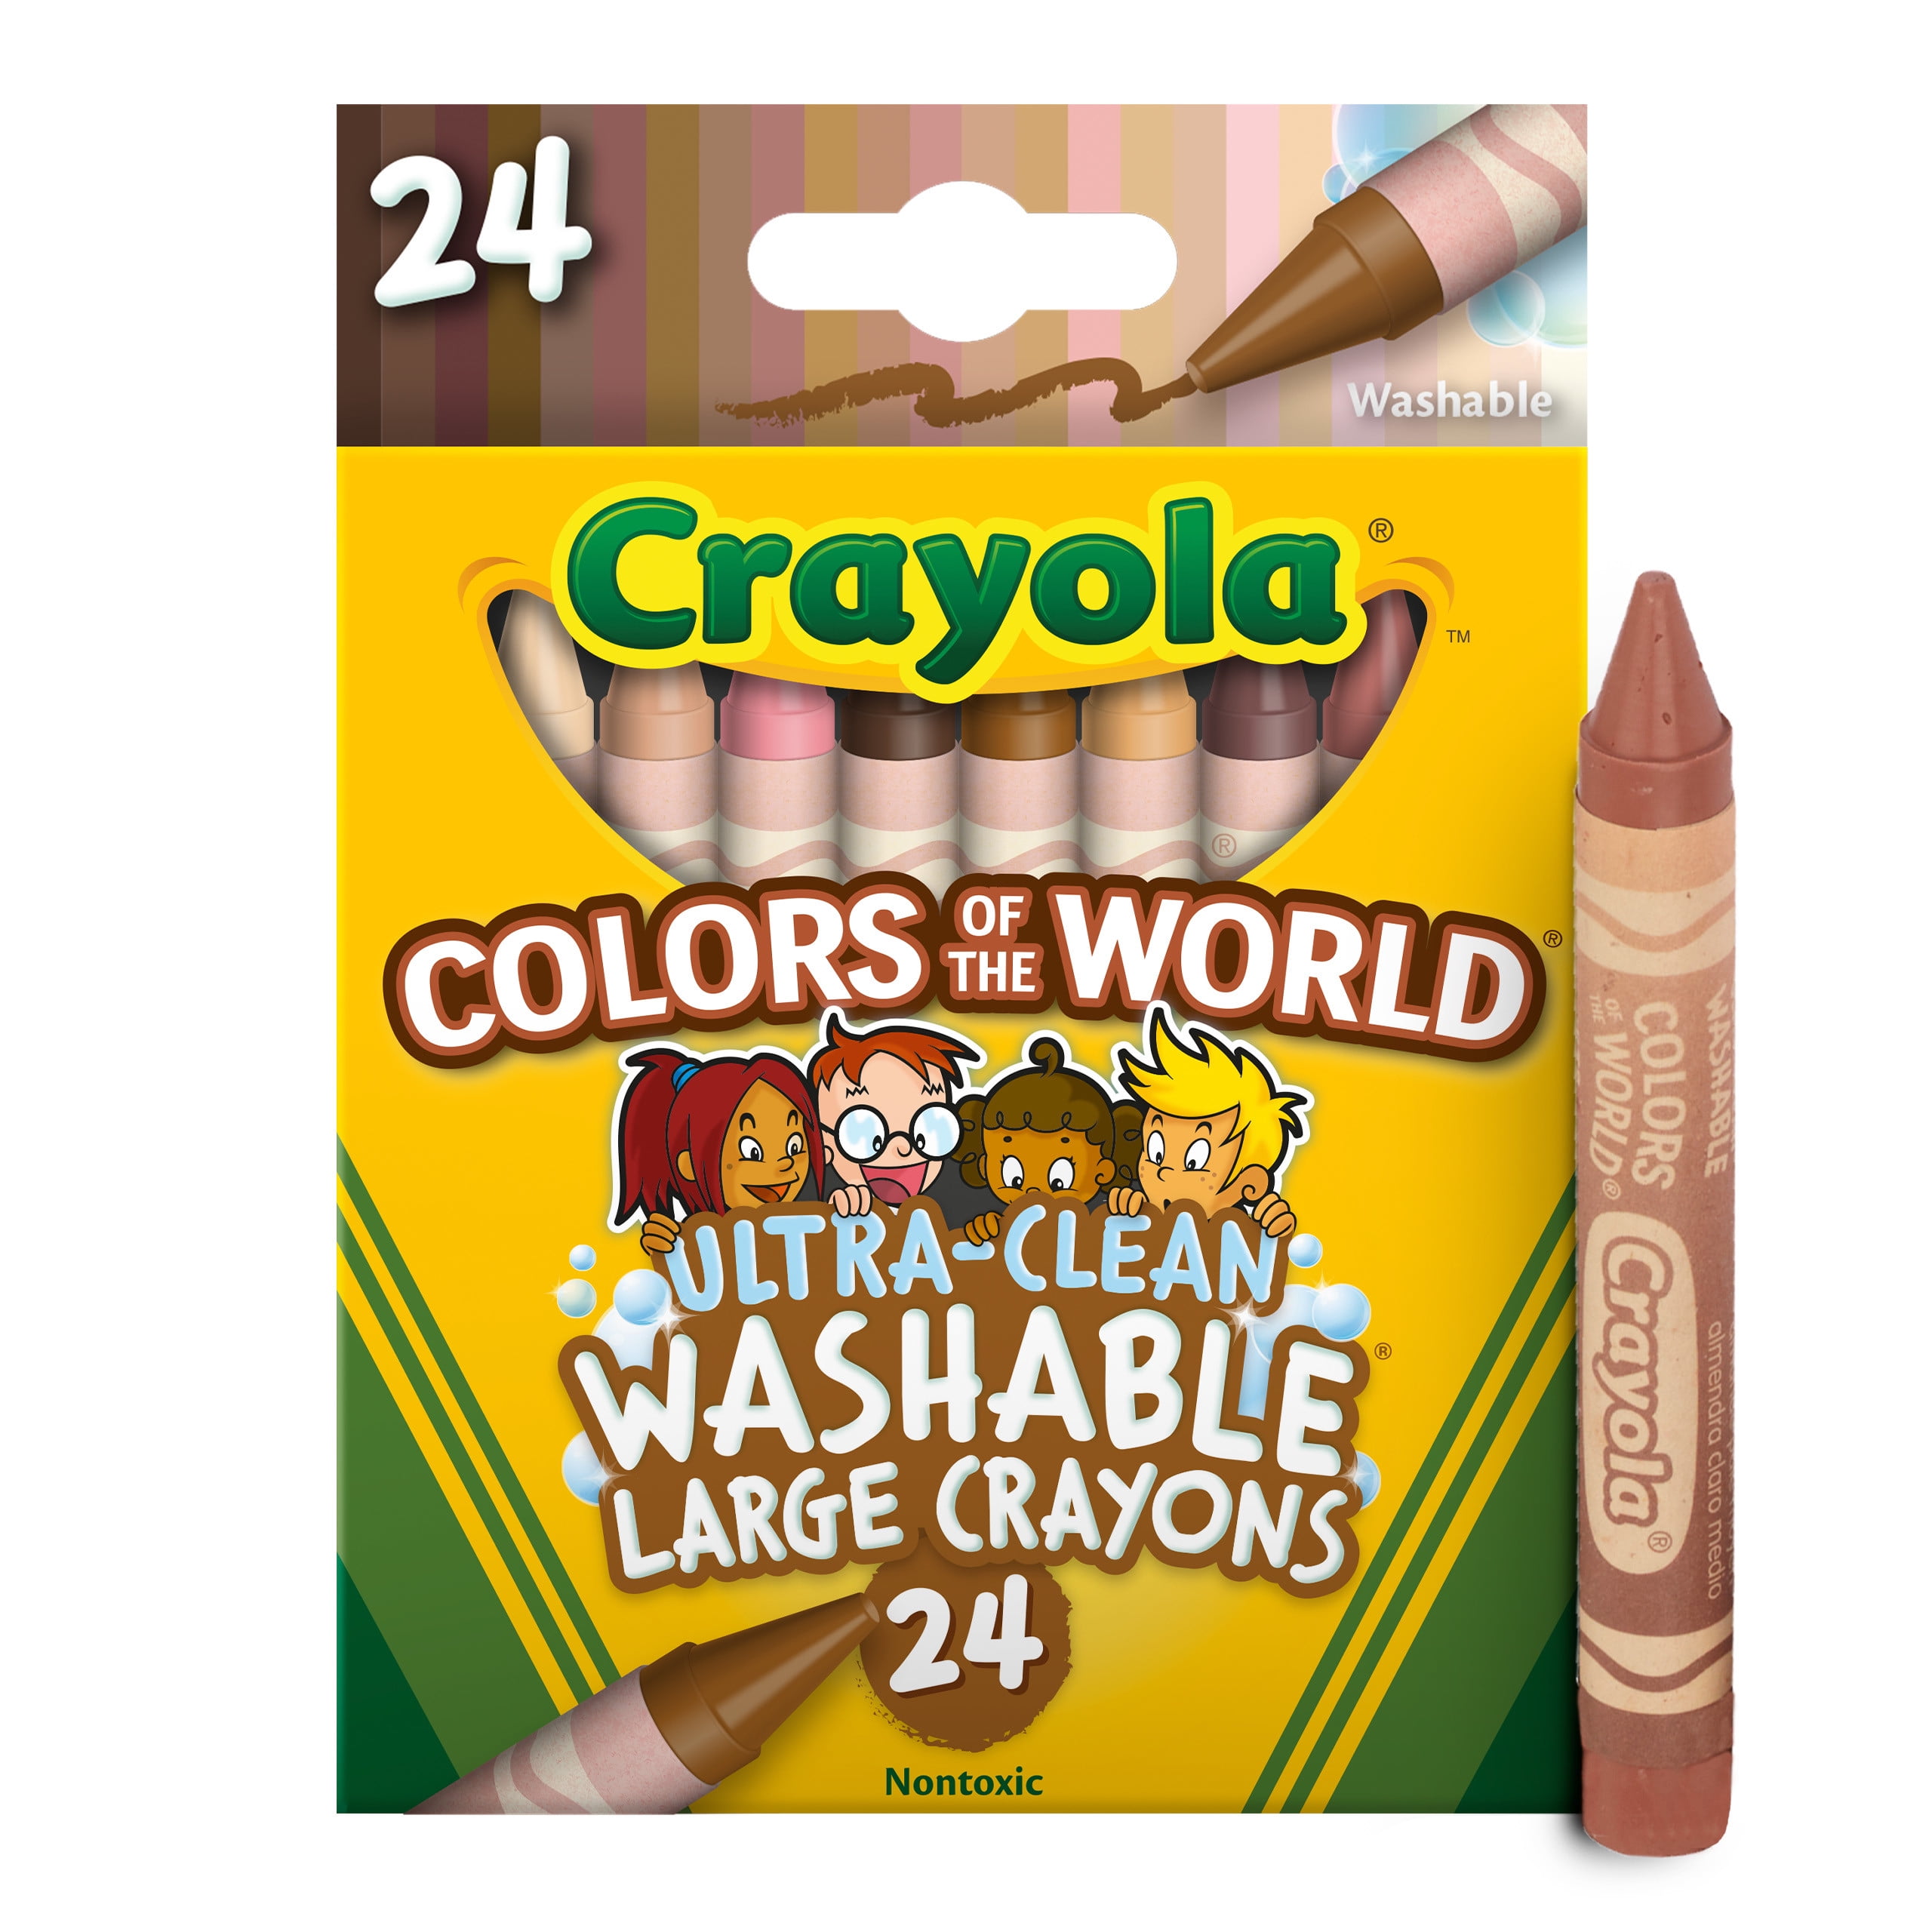 Crayola® Colors of the World 24-Count Markers - Set of 4